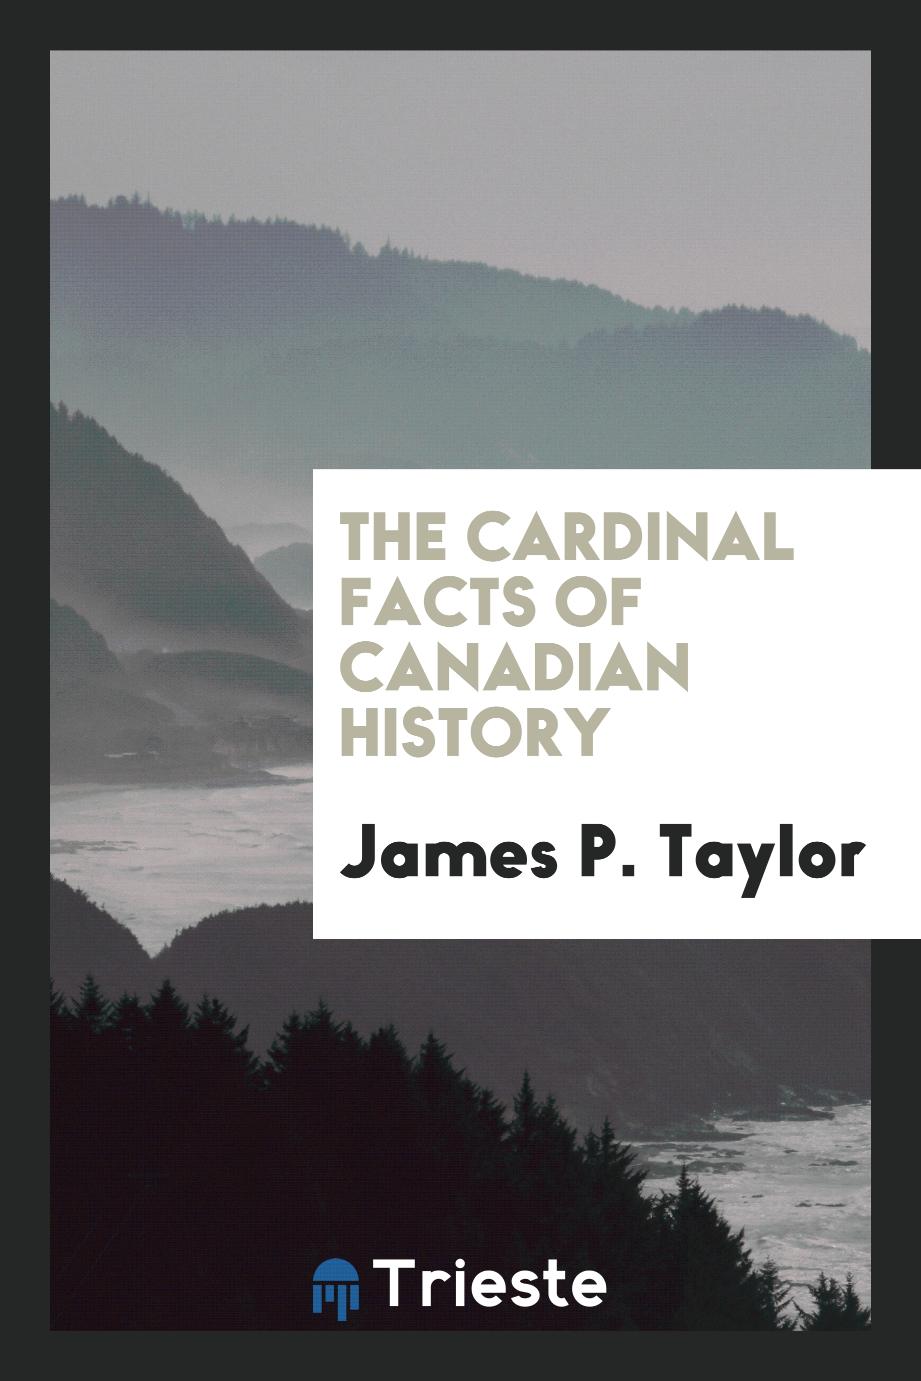 The cardinal facts of Canadian history